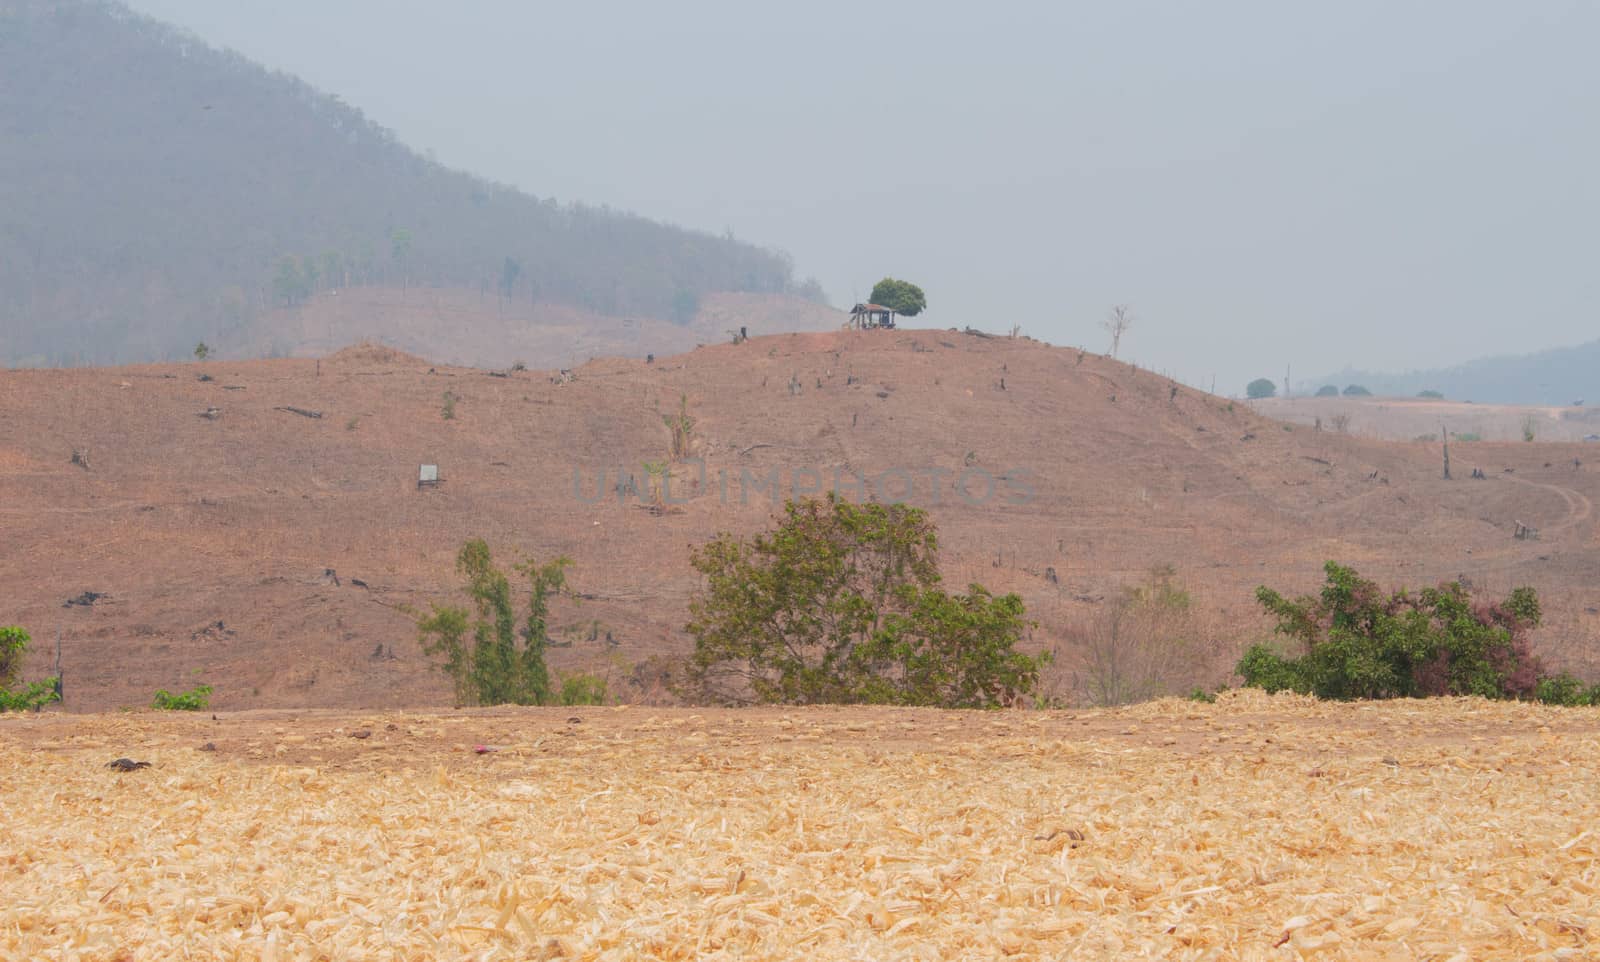 Dry stack of corn husk on the ground after harvesting in northern Thailand.